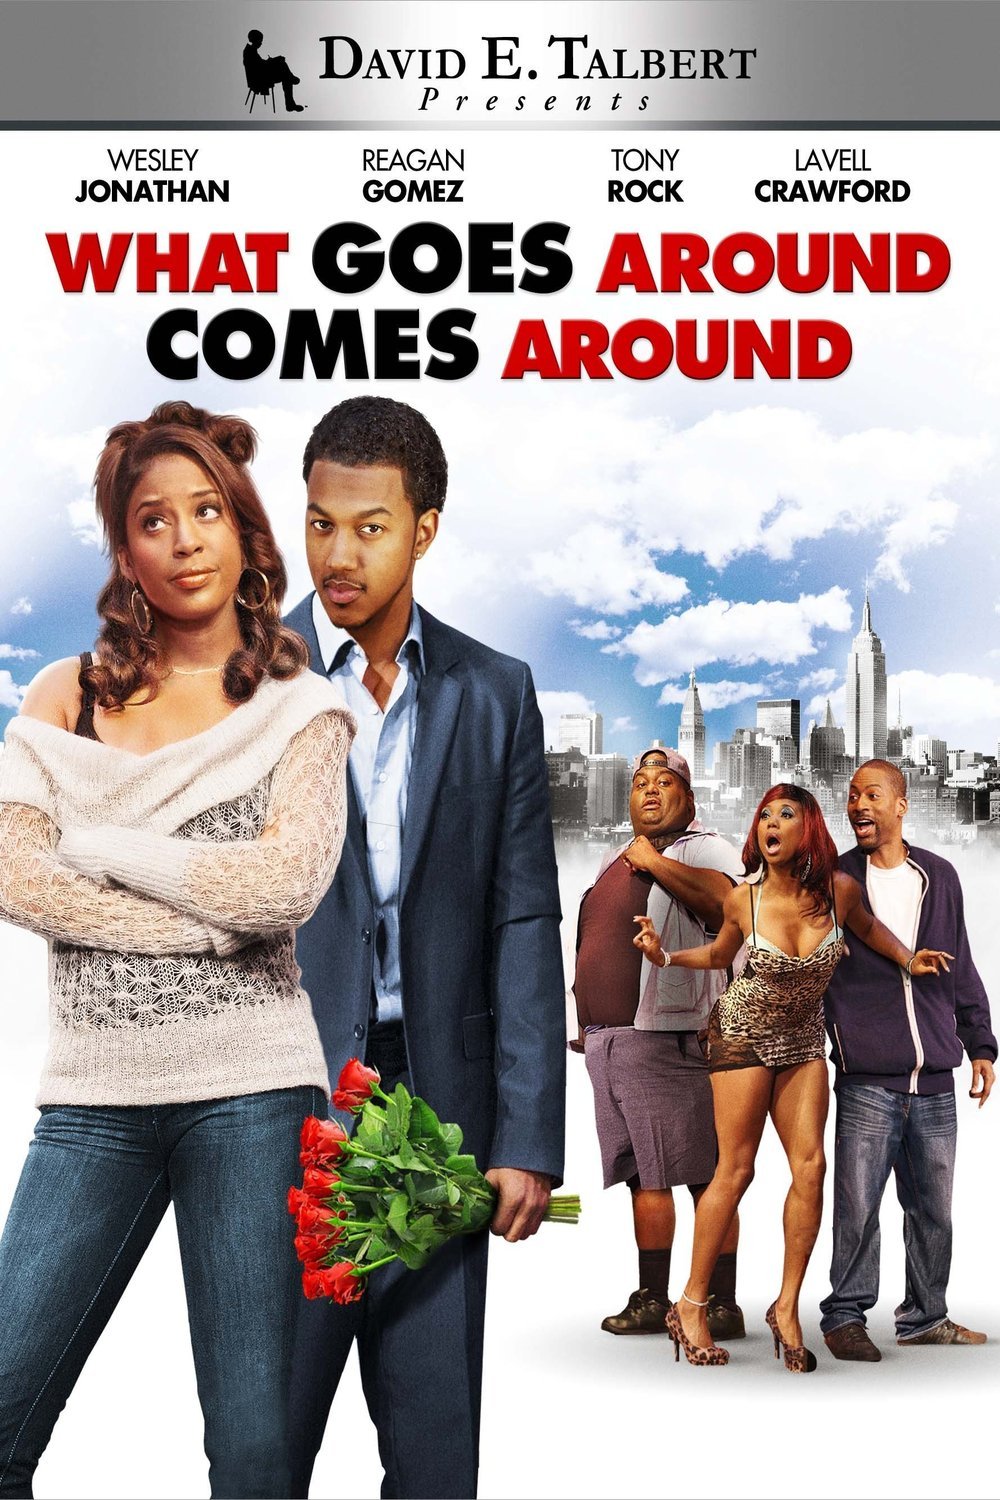 Poster of the movie What Goes Around Comes Around